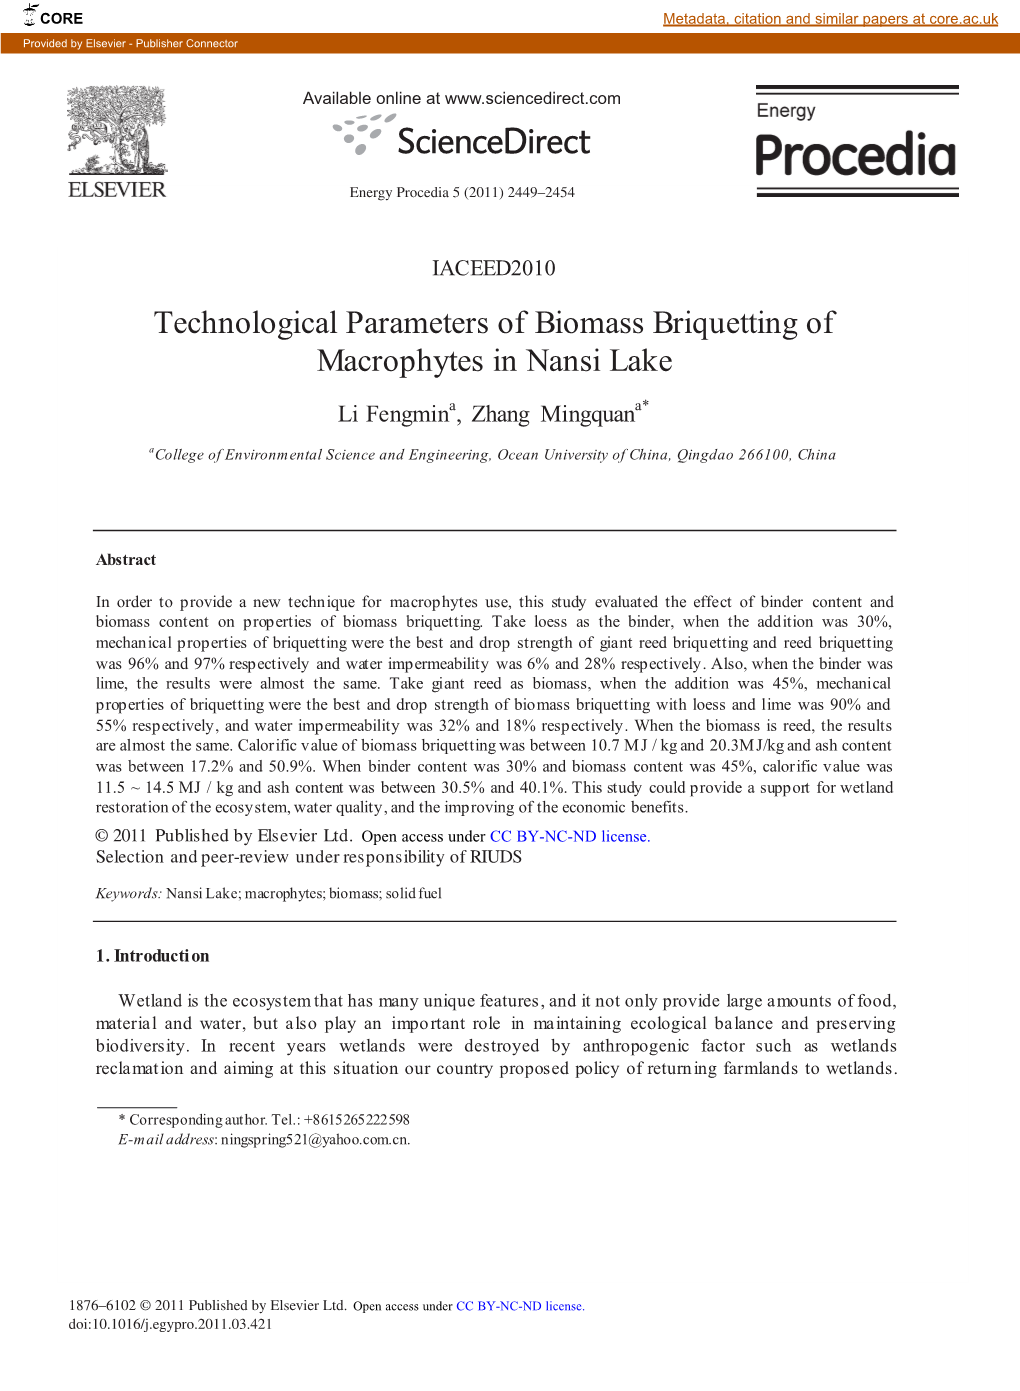 Technological Parameters of Biomass Briquetting of Macrophytes in Nansi Lake